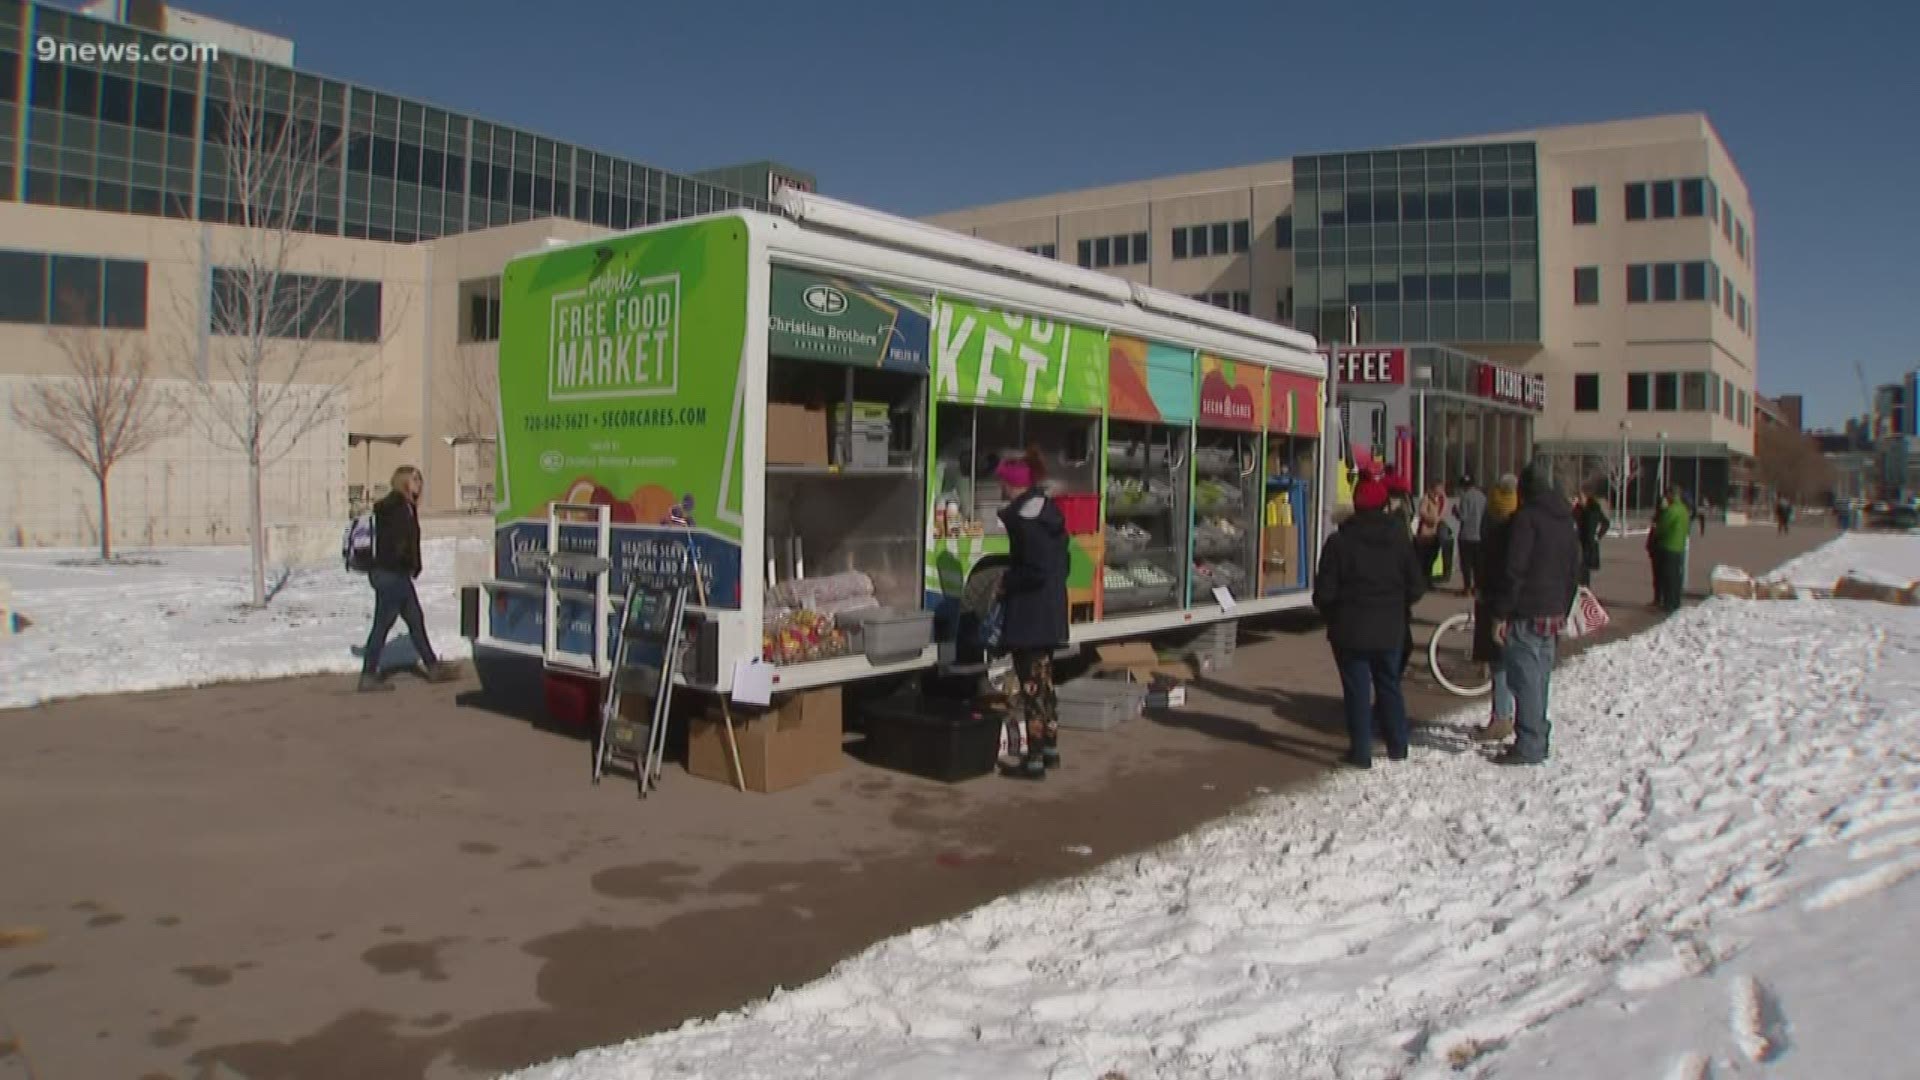 Metro State University of Denver is hosting free food markets for students on Feb. 5 and Feb. 11.